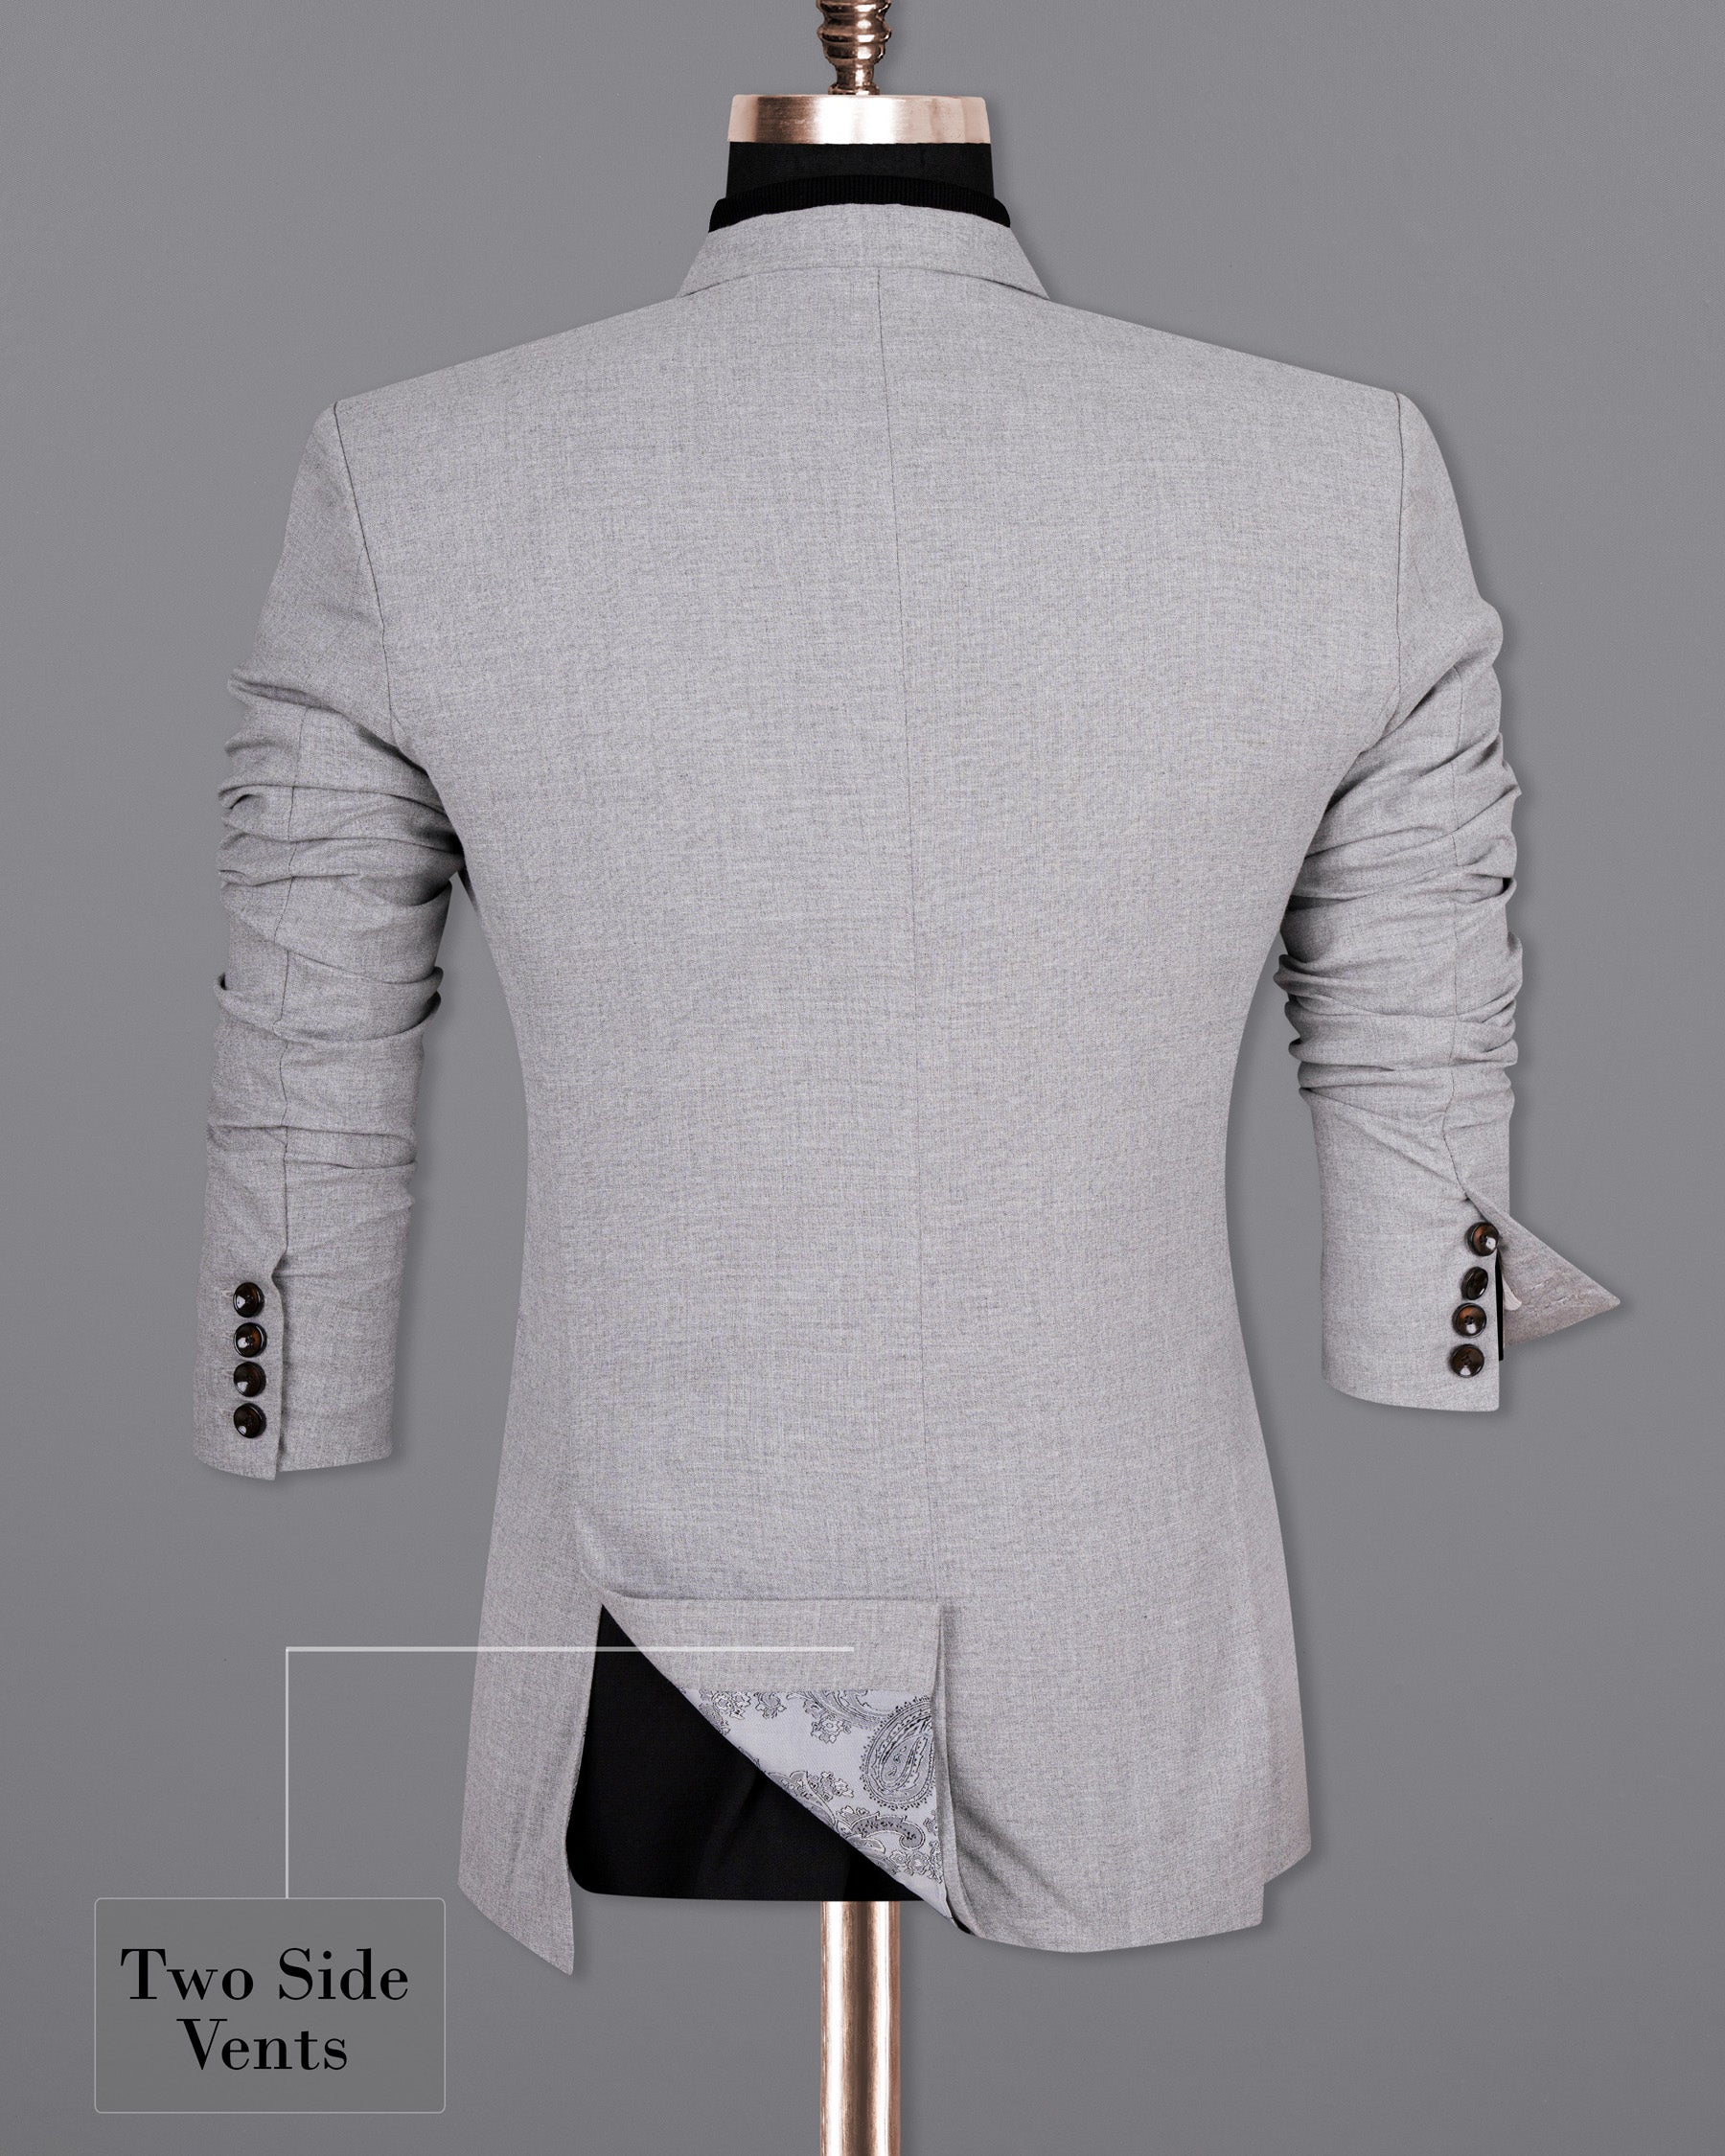 French Gray DouSTe-Breasted Wool Rich Sport Suit ST1495-DB-PP-36, ST1495-DB-PP-38, ST1495-DB-PP-40, ST1495-DB-PP-42, ST1495-DB-PP-44, ST1495-DB-PP-46, ST1495-DB-PP-48, ST1495-DB-PP-50, ST1495-DB-PP-52, ST1495-DB-PP-54, ST1495-DB-PP-56, ST1495-DB-PP-58, ST1495-DB-PP-60